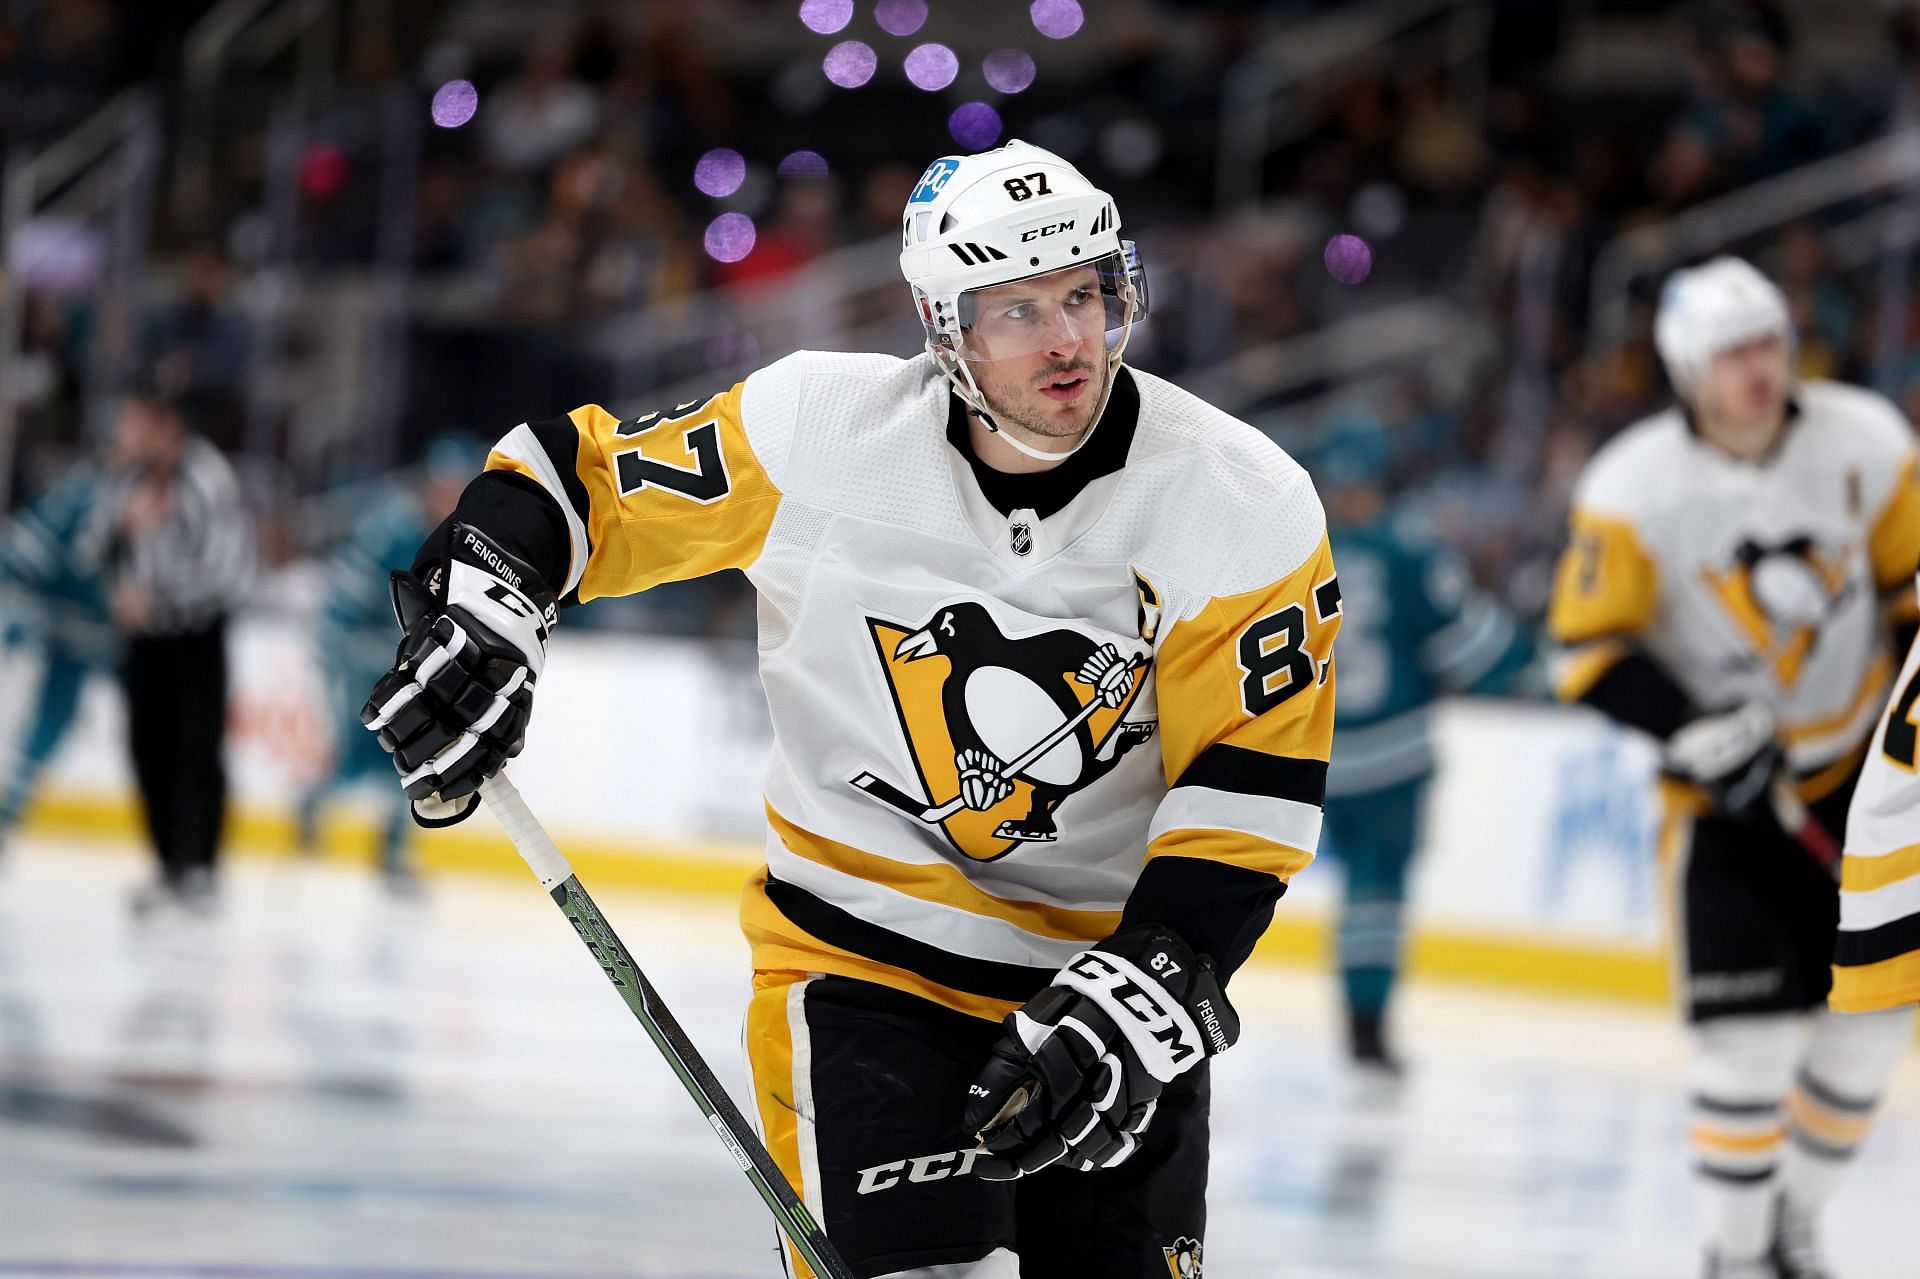 30+ Pittsburgh Penguins HD Wallpapers and Backgrounds